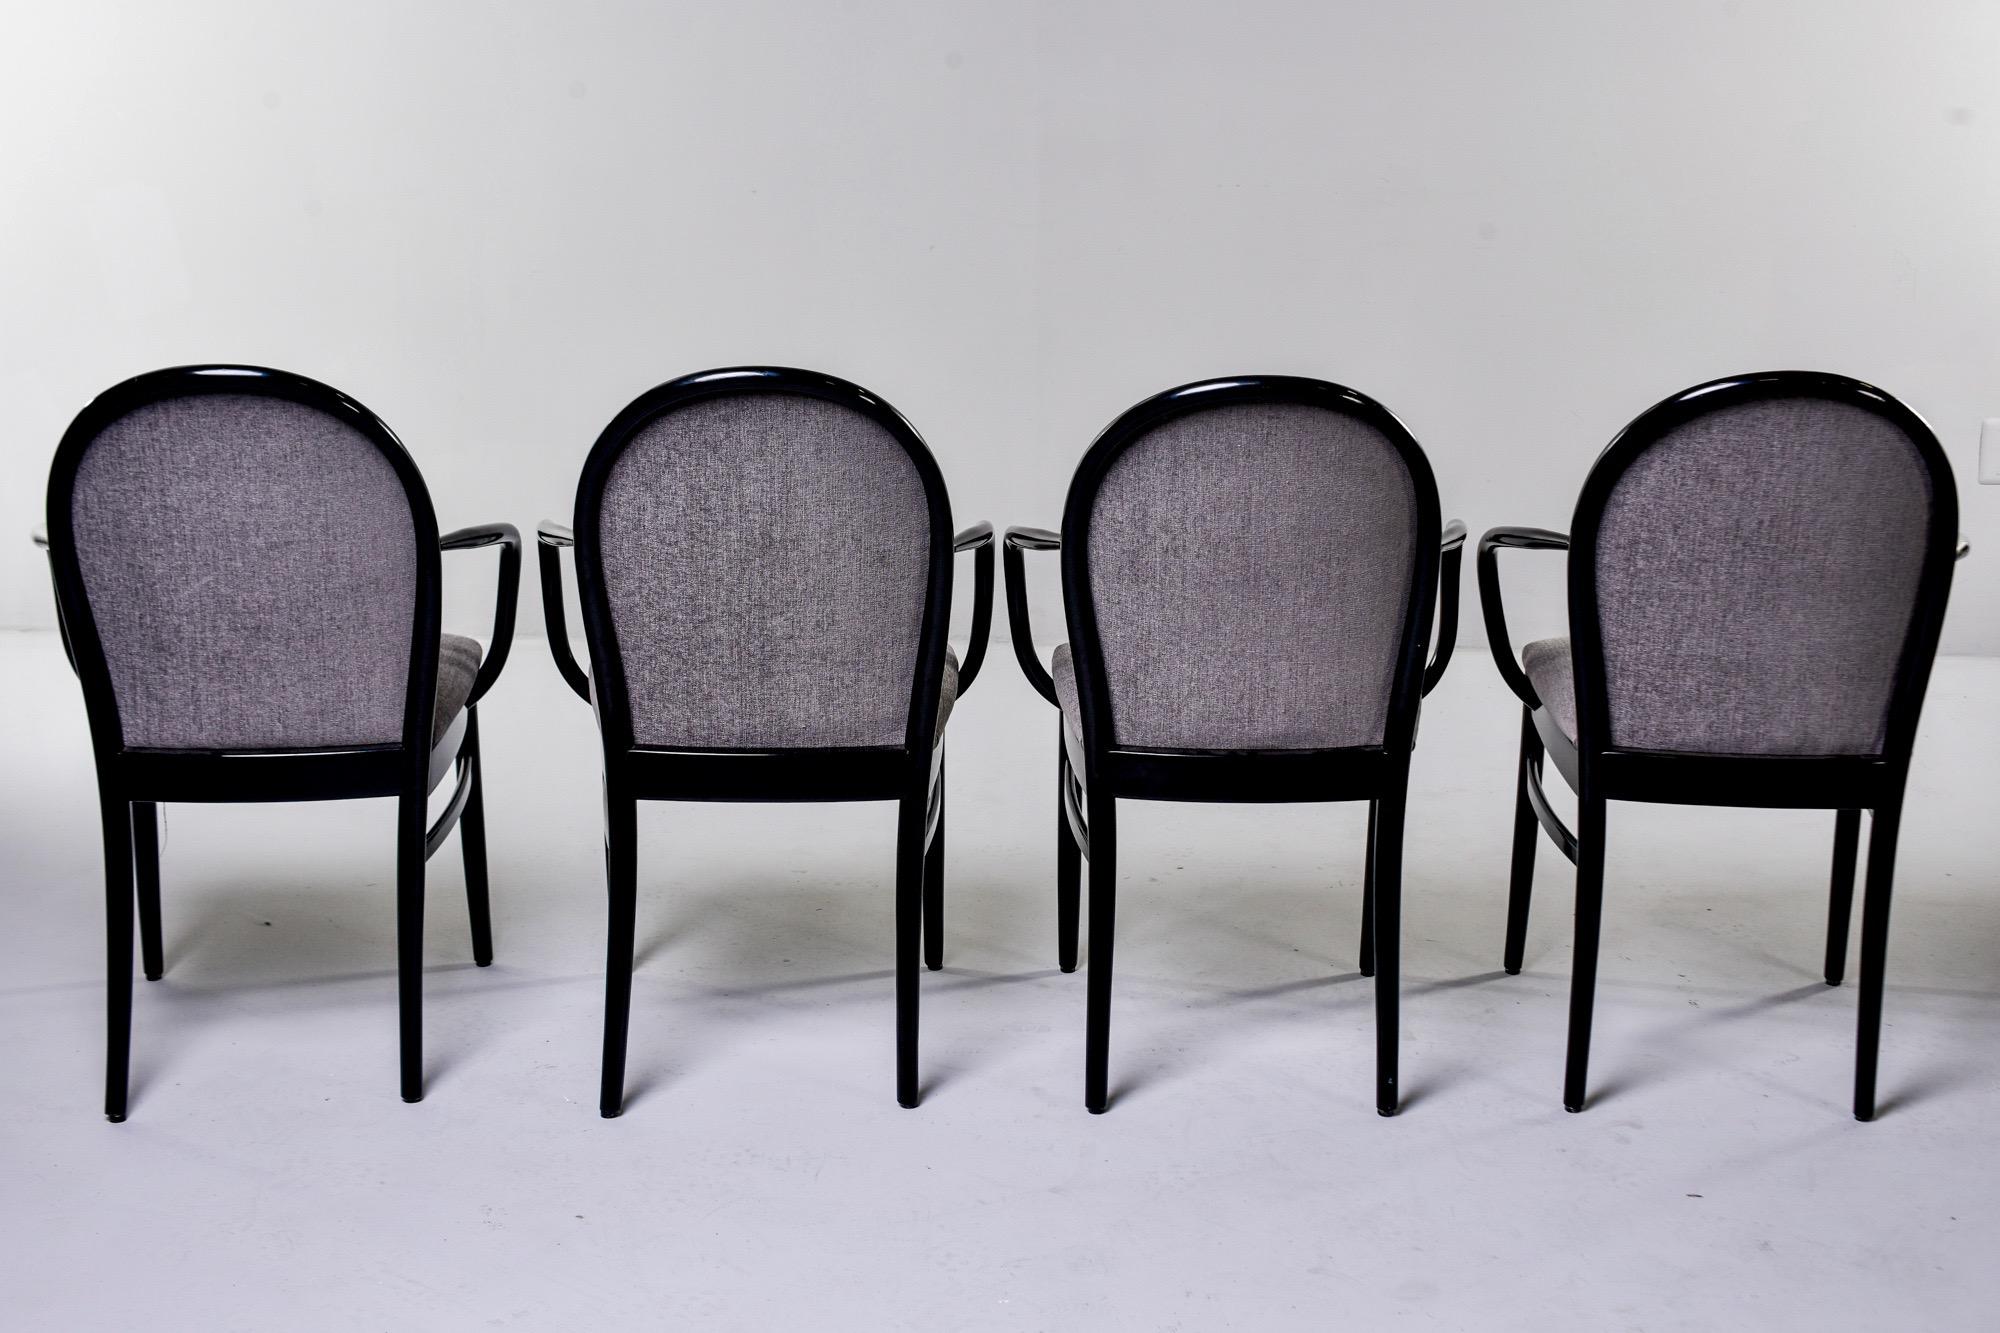 Found in England, this set of circa 1960s bentwood armchairs were professionally ebonized and reupholstered in a gray chenille velvet. Unknown maker. Sold and priced as a set of four.

Size: Arm height 25.5” to 27.5”, seat height 20”
Seat depth